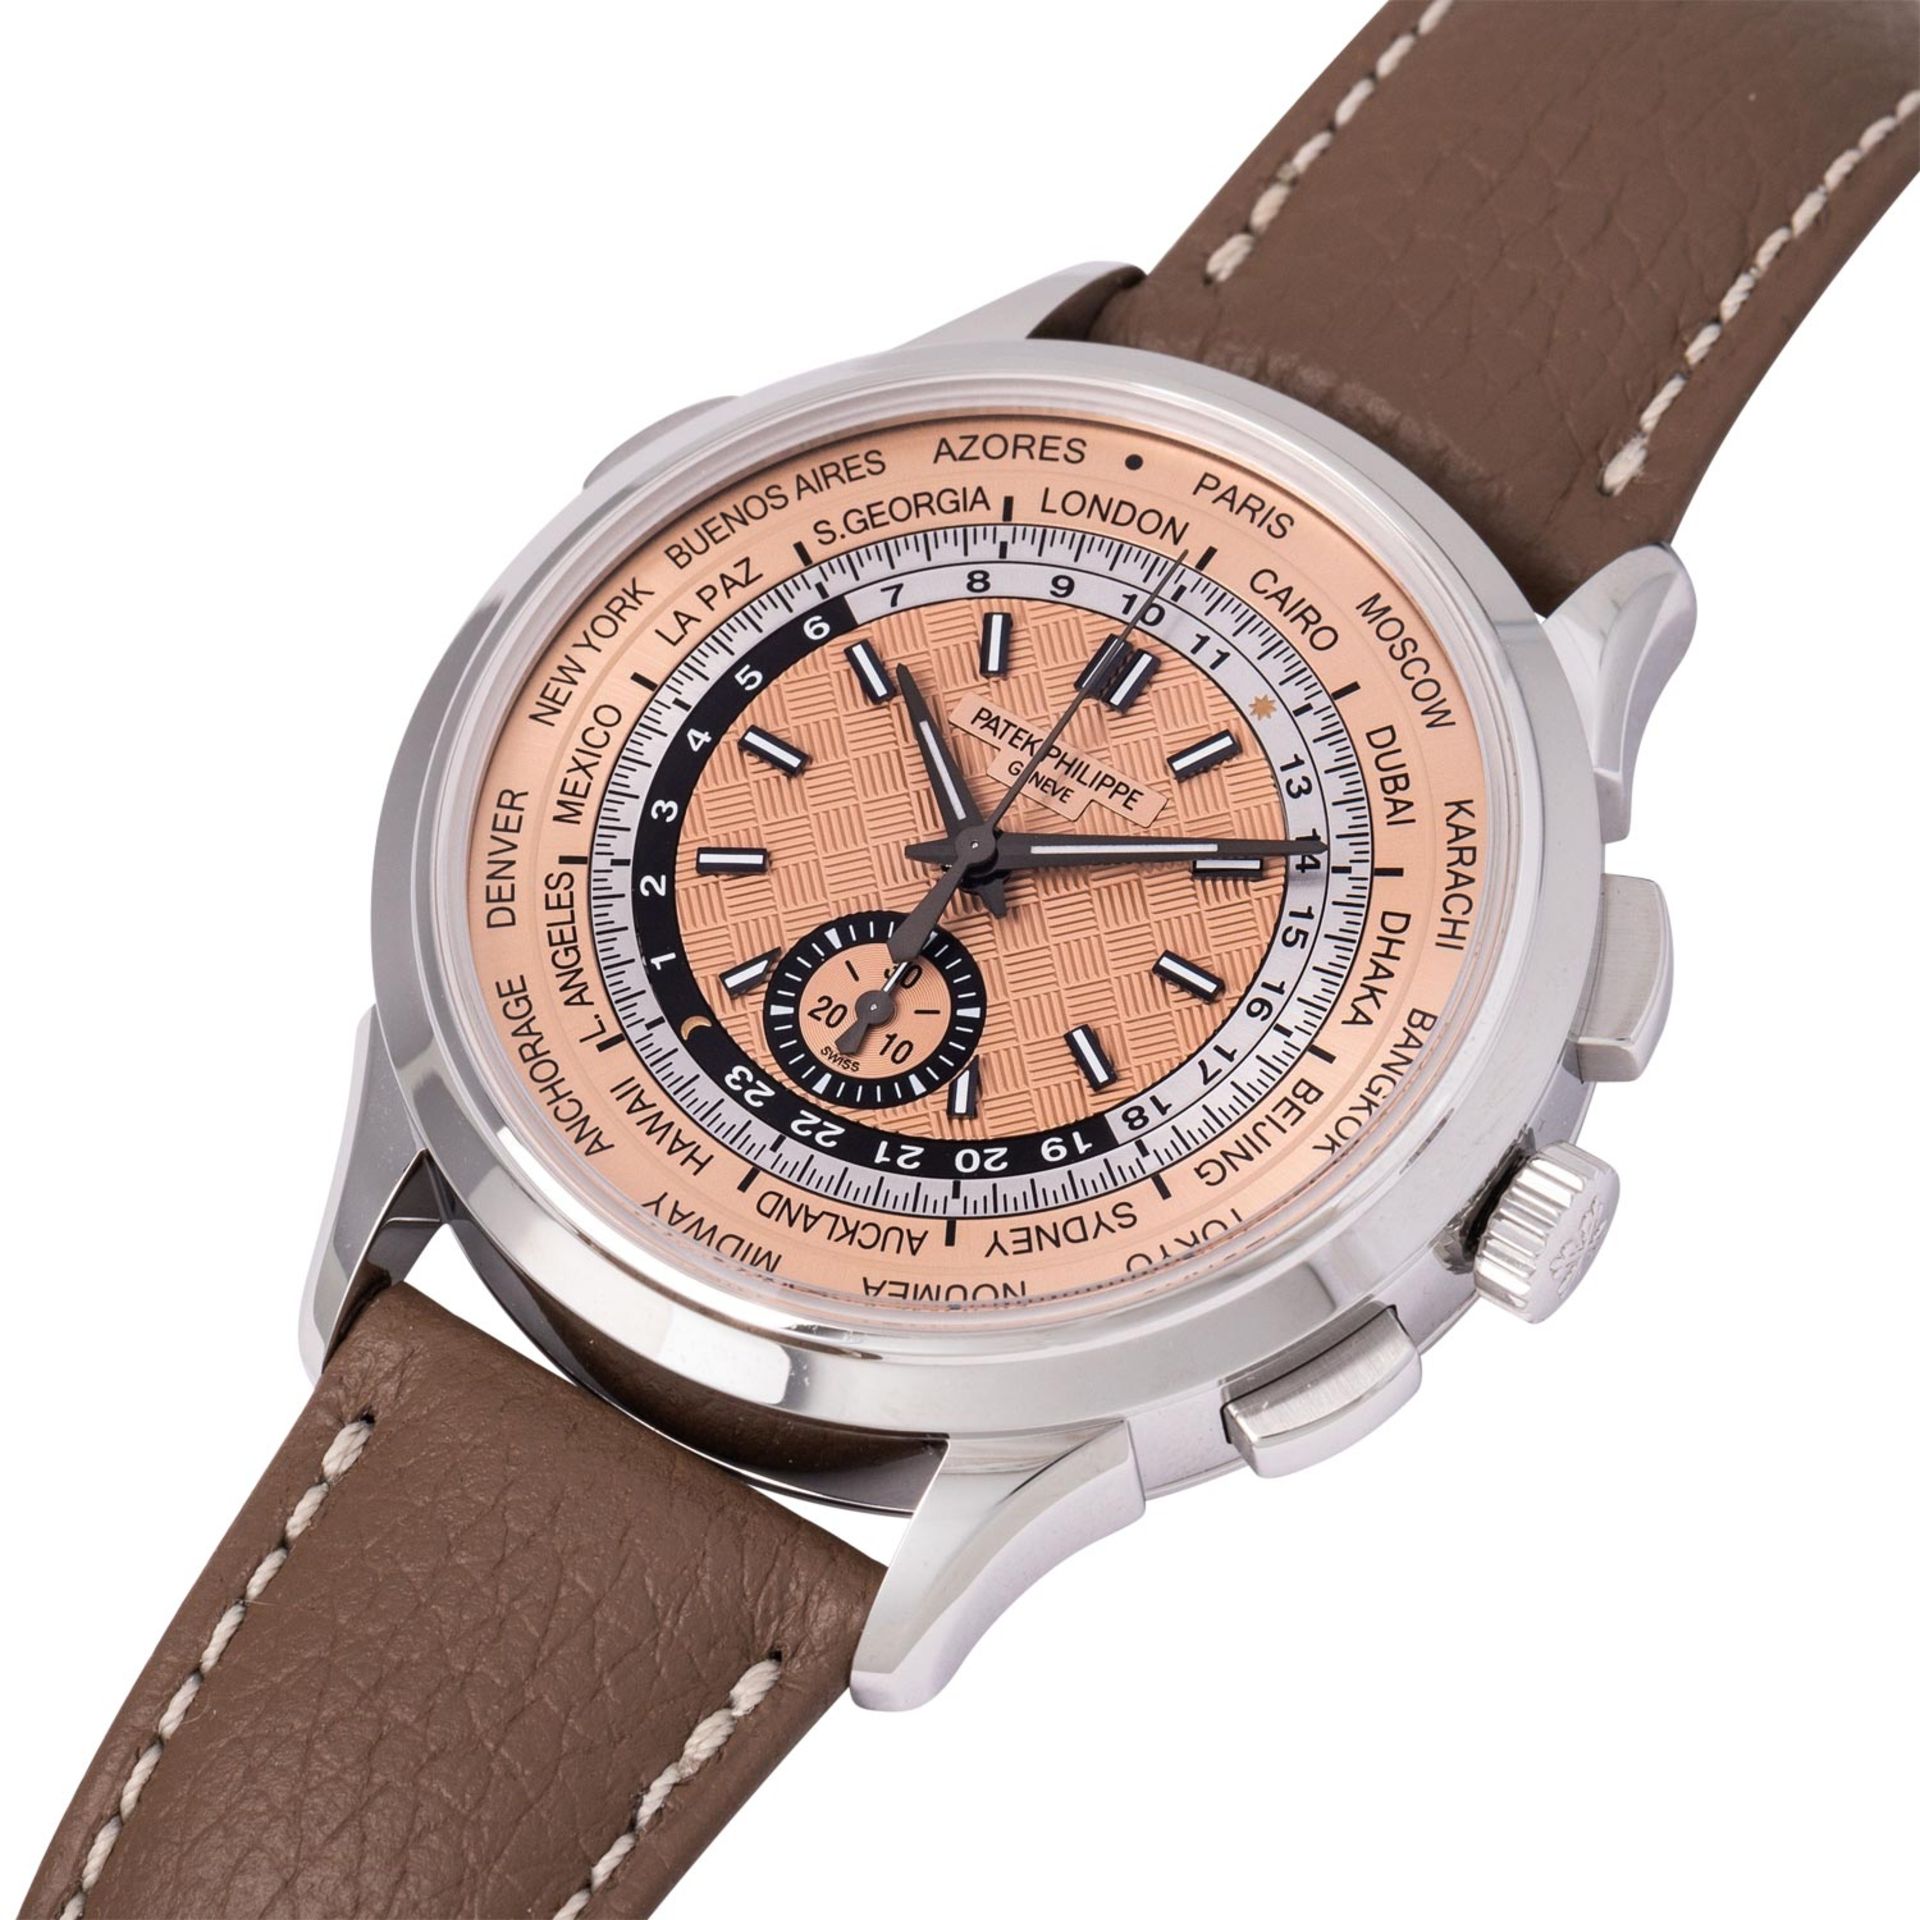 PATEK PHILIPPE World Time Flyback-Chronograph, Ref. 5935A-001. Herrenuhr. - Image 5 of 8